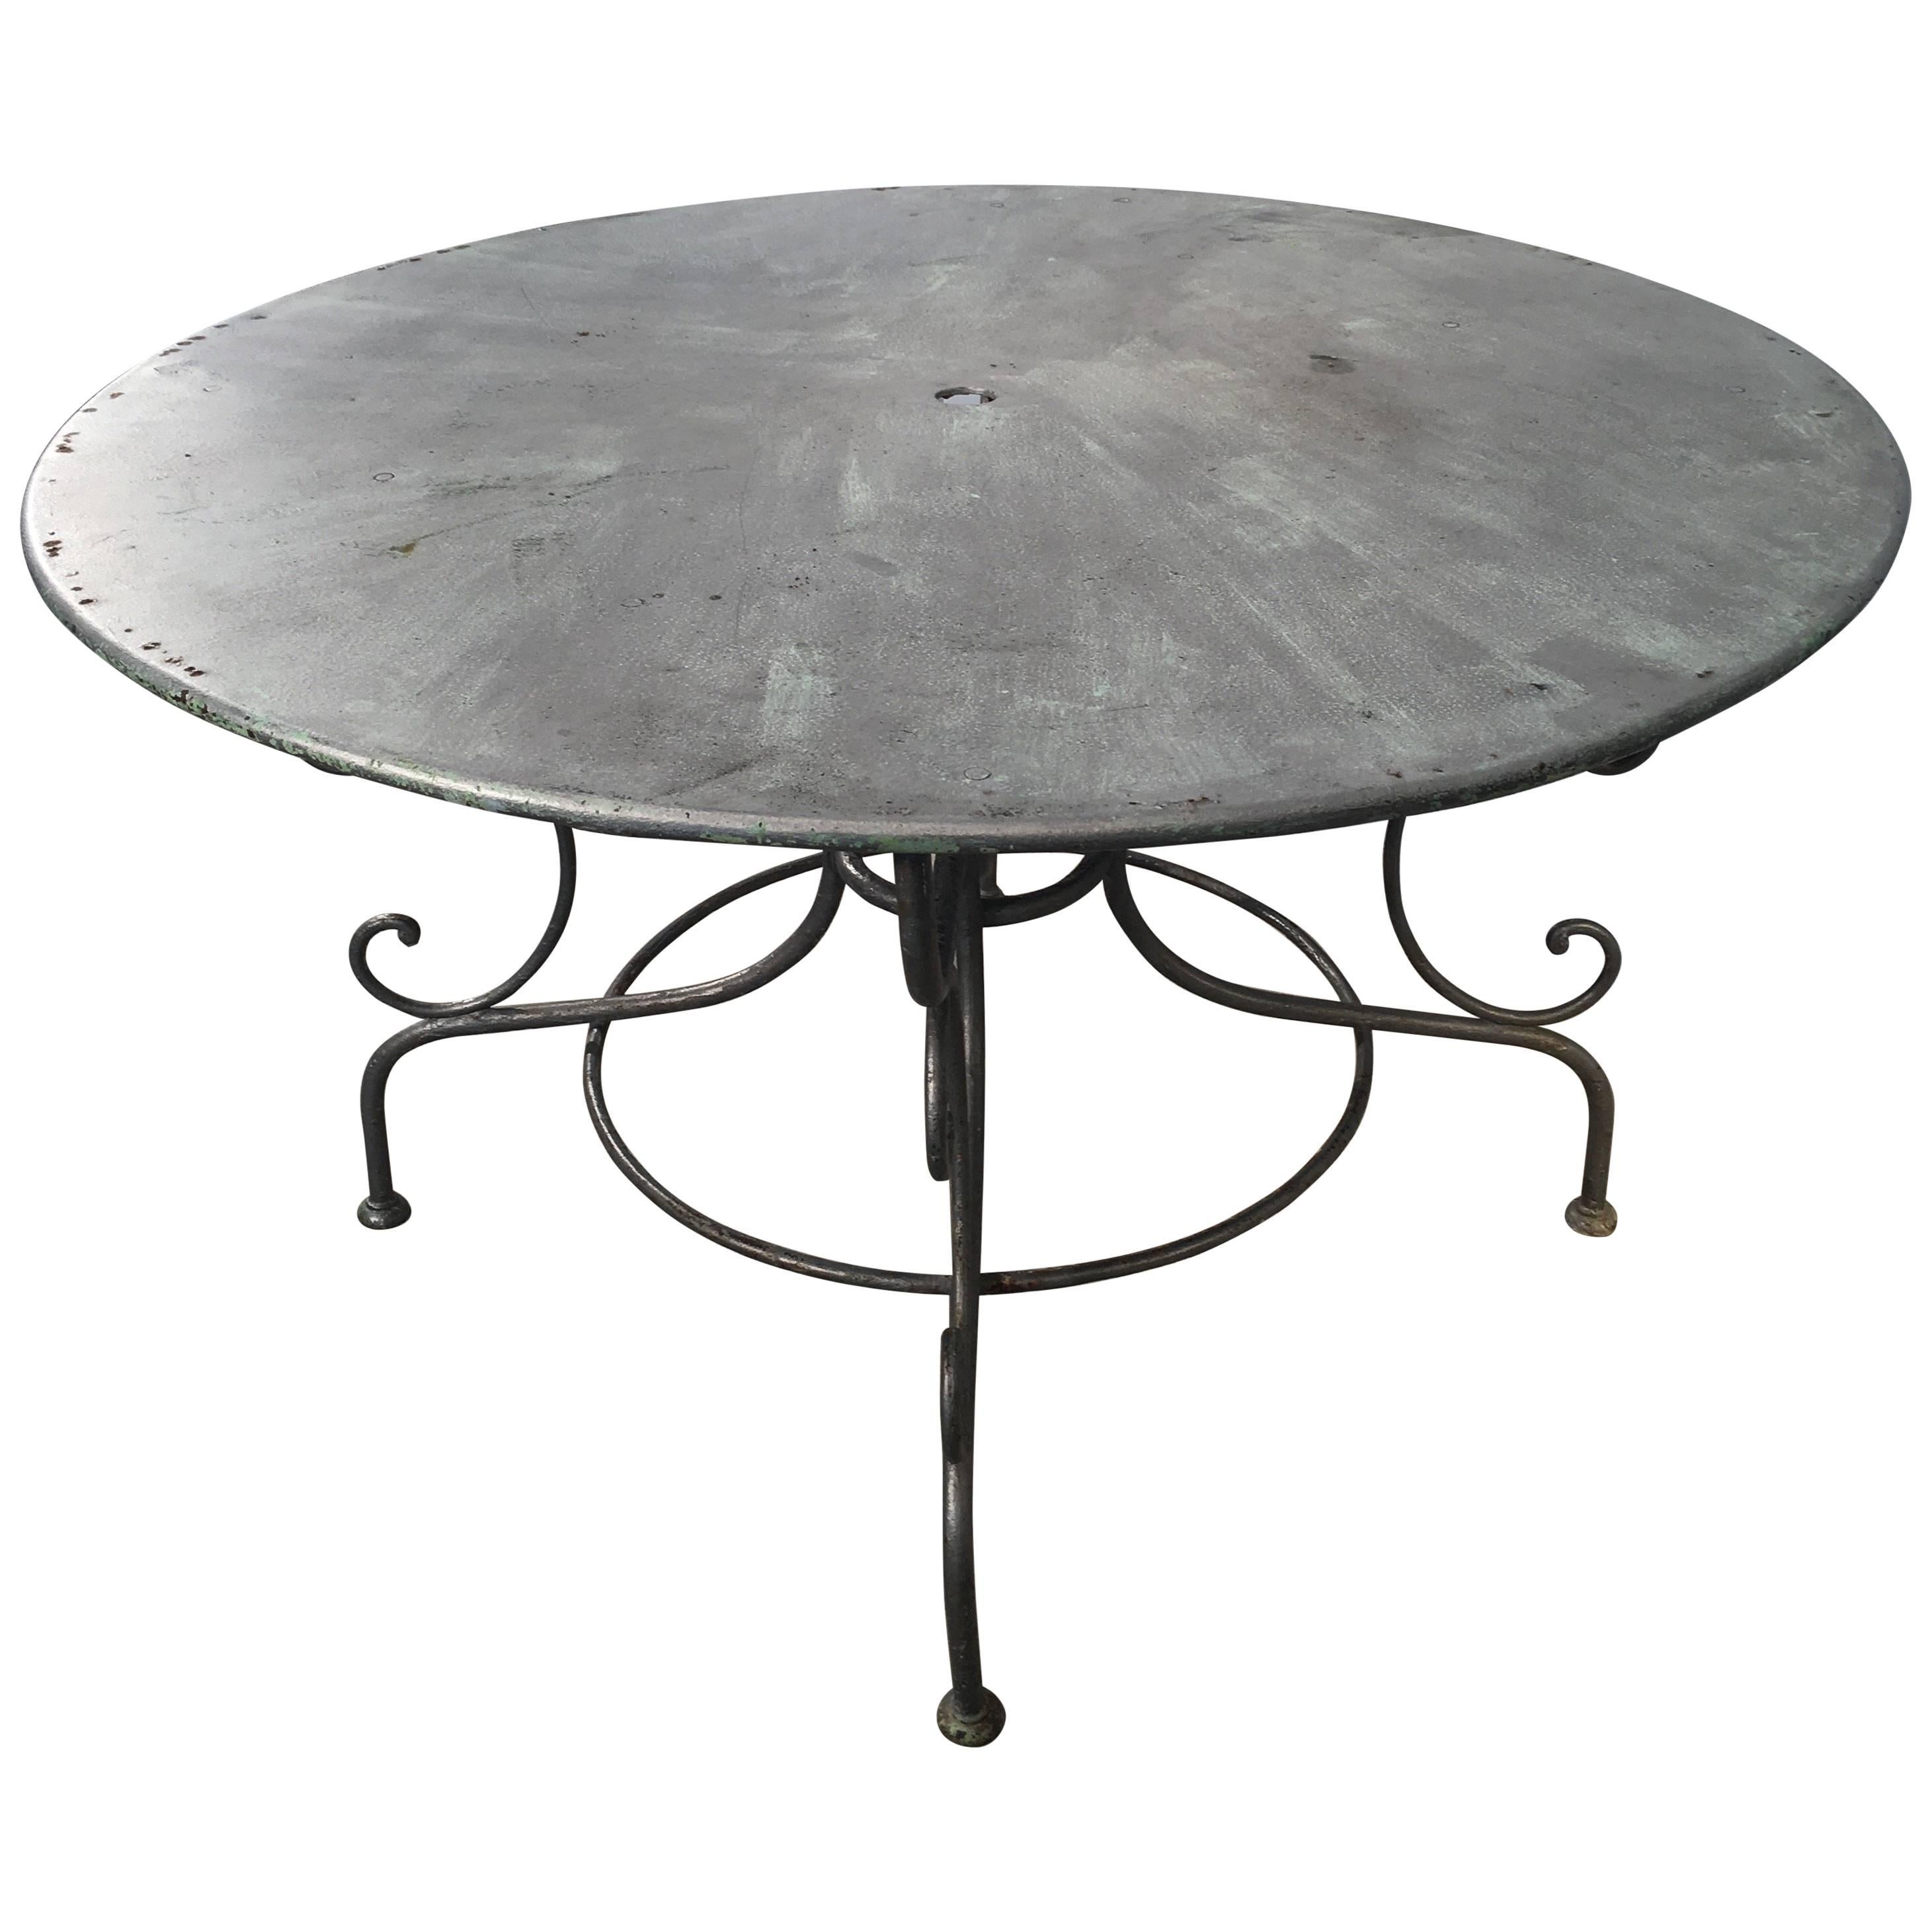 French Wrought Iron Round Dining Table with Scrolled Base